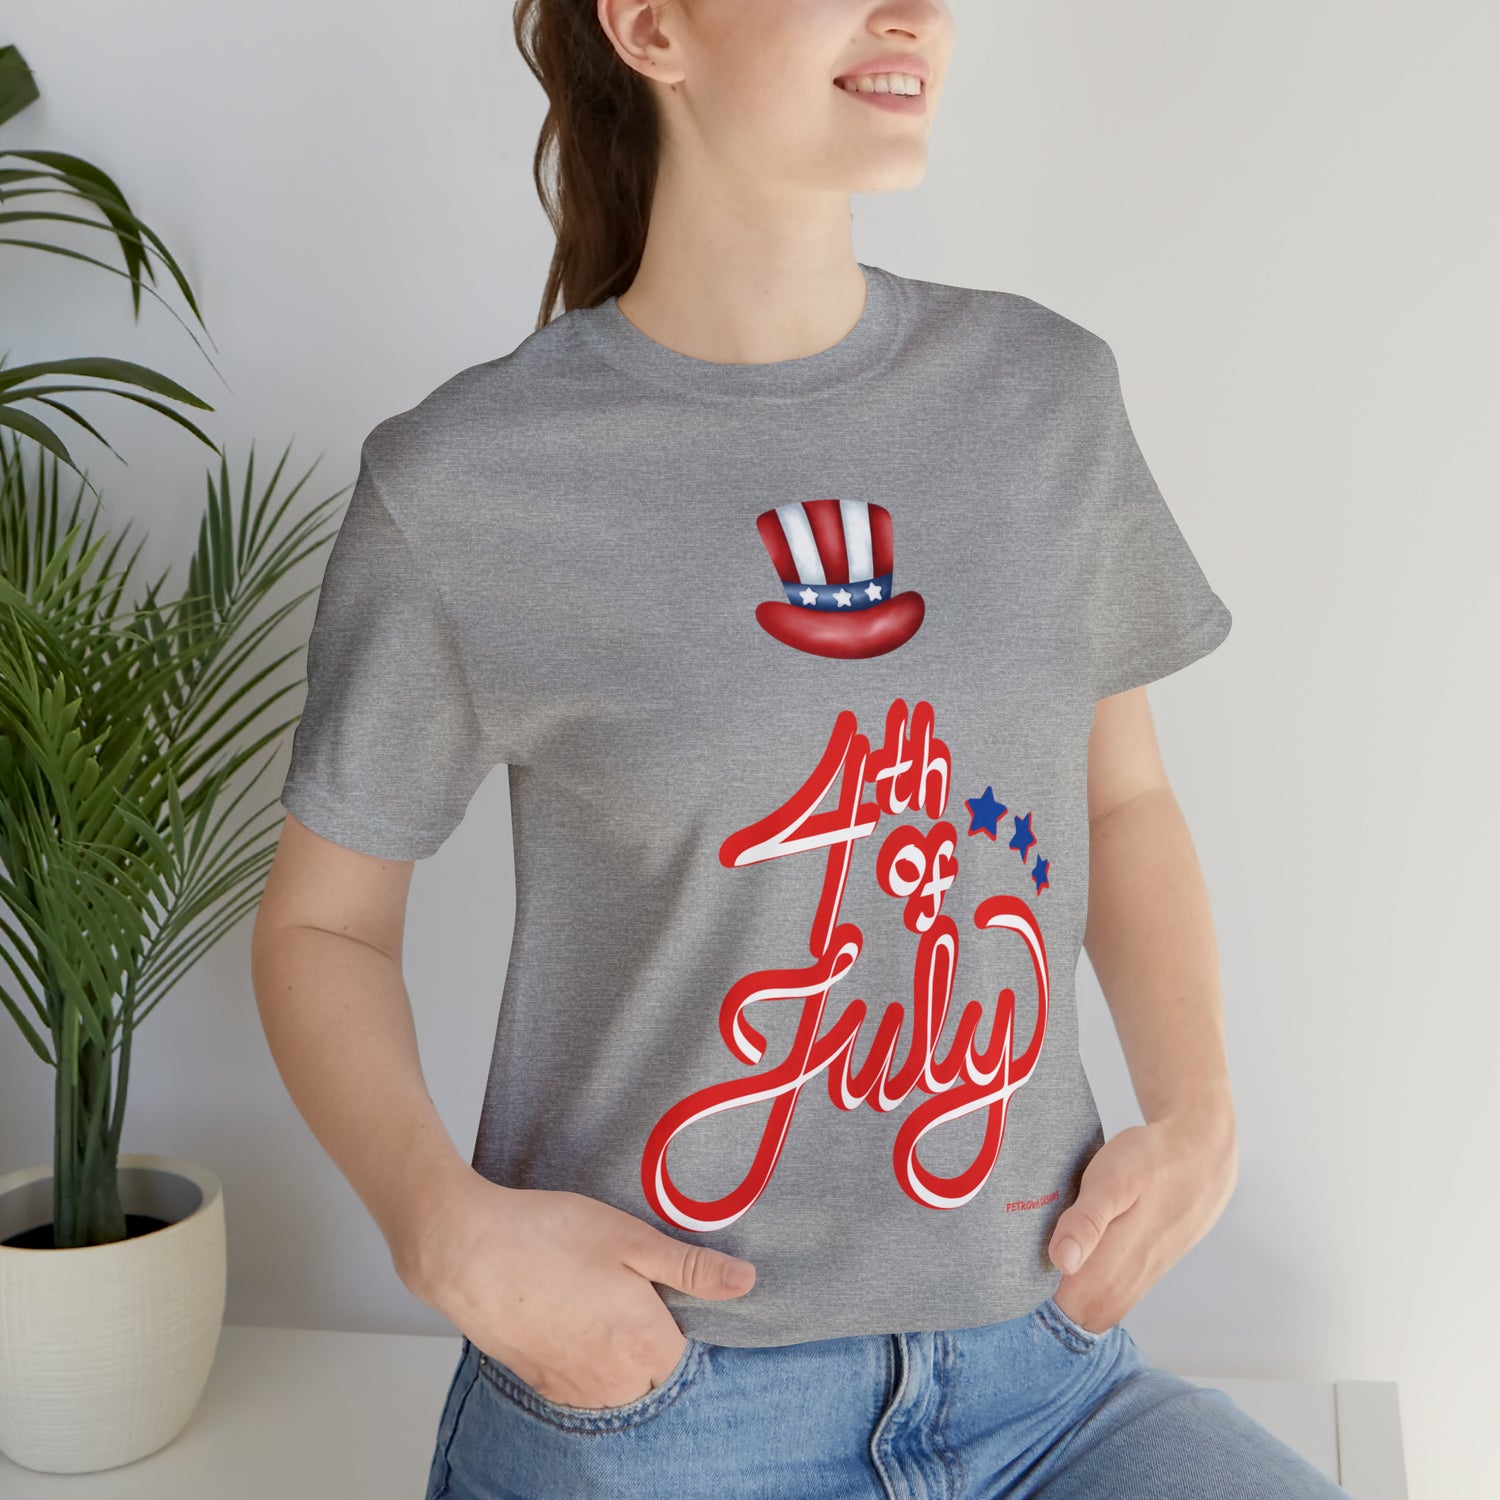 Athletic Heather T-Shirt Tshirt Design Gift for Friend and Family Short Sleeved Shirt 4th of July Independence Day Petrova Designs